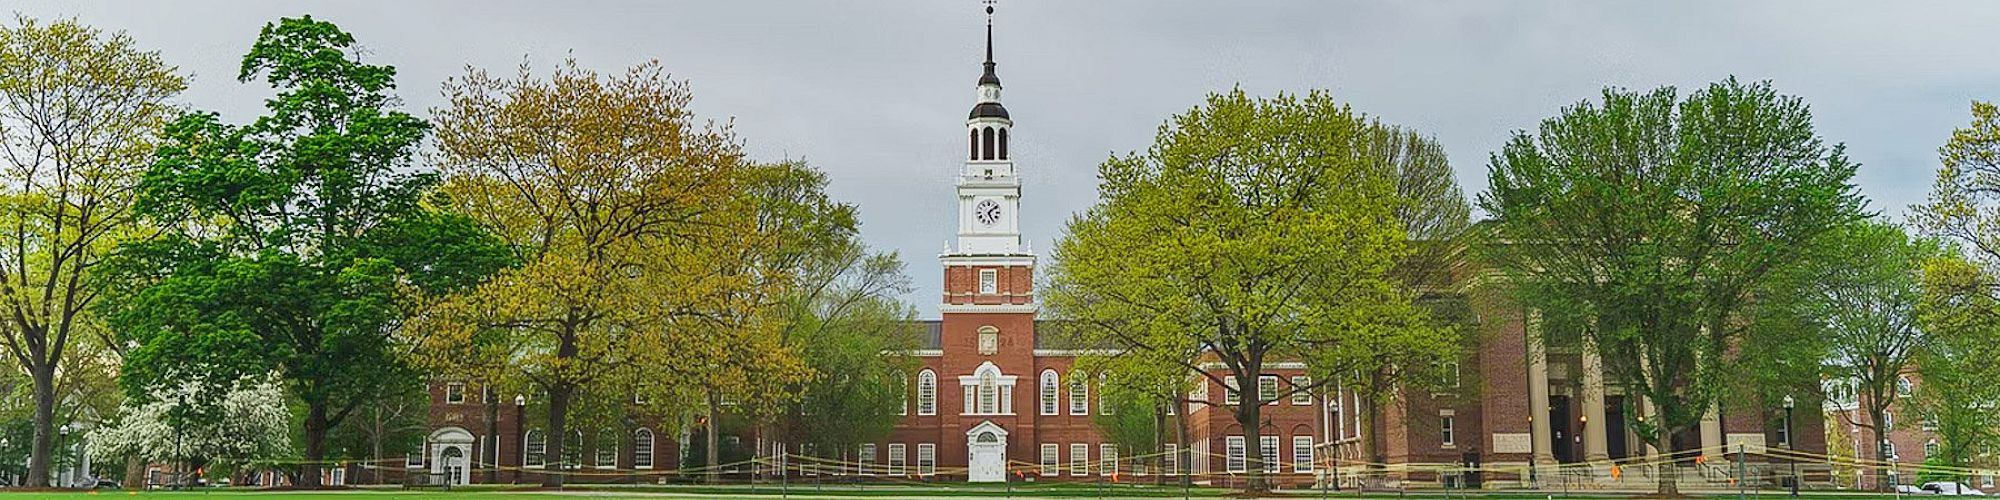 Image shows a brick building with a tall clock tower surrounded by trees on a green lawn under a cloudy sky.